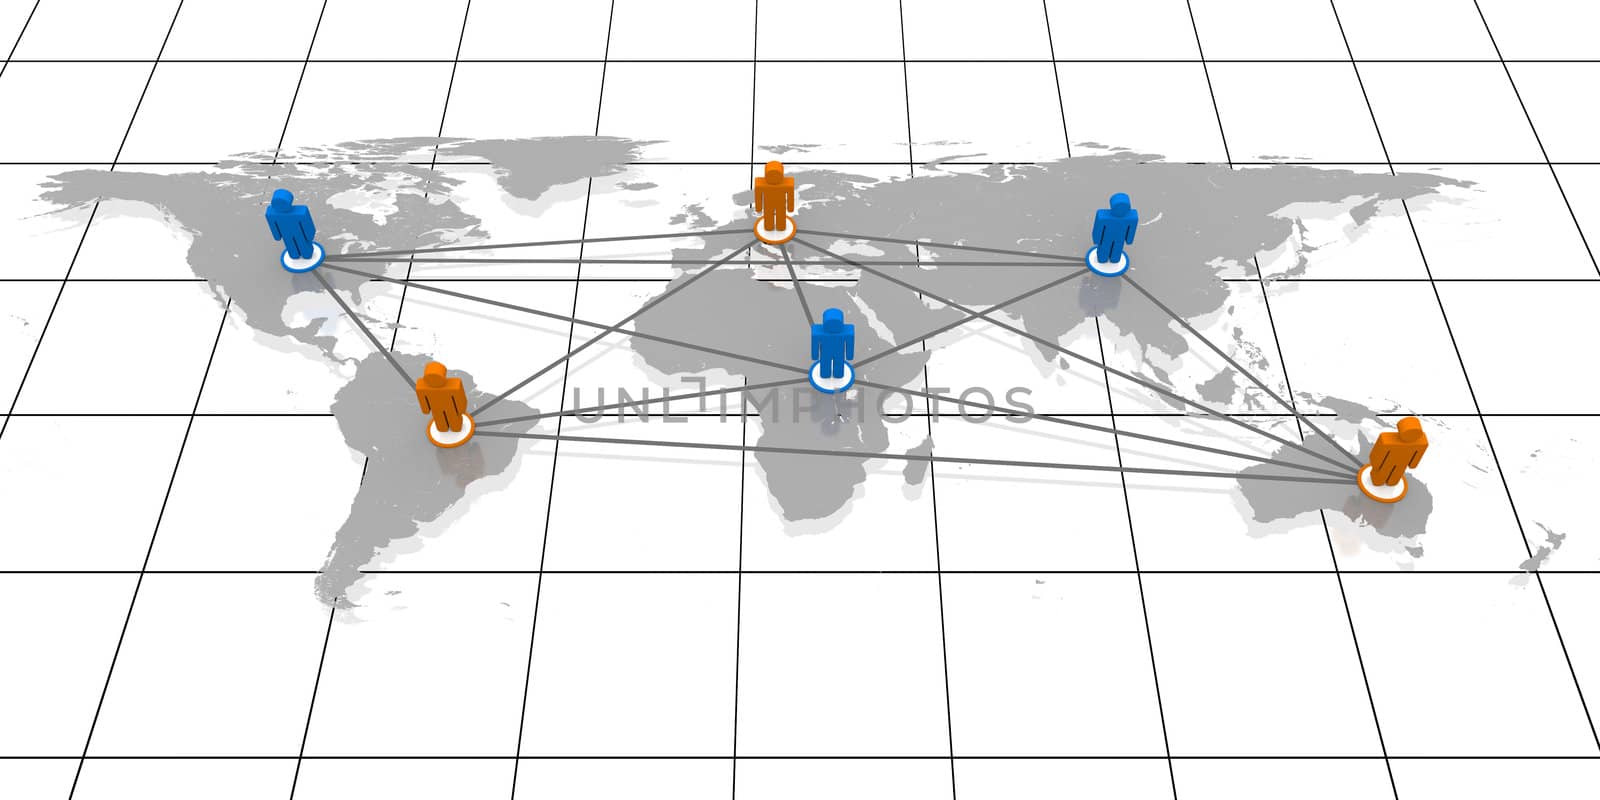 Concept of global network with coloured figurines on world's continents connected to each other